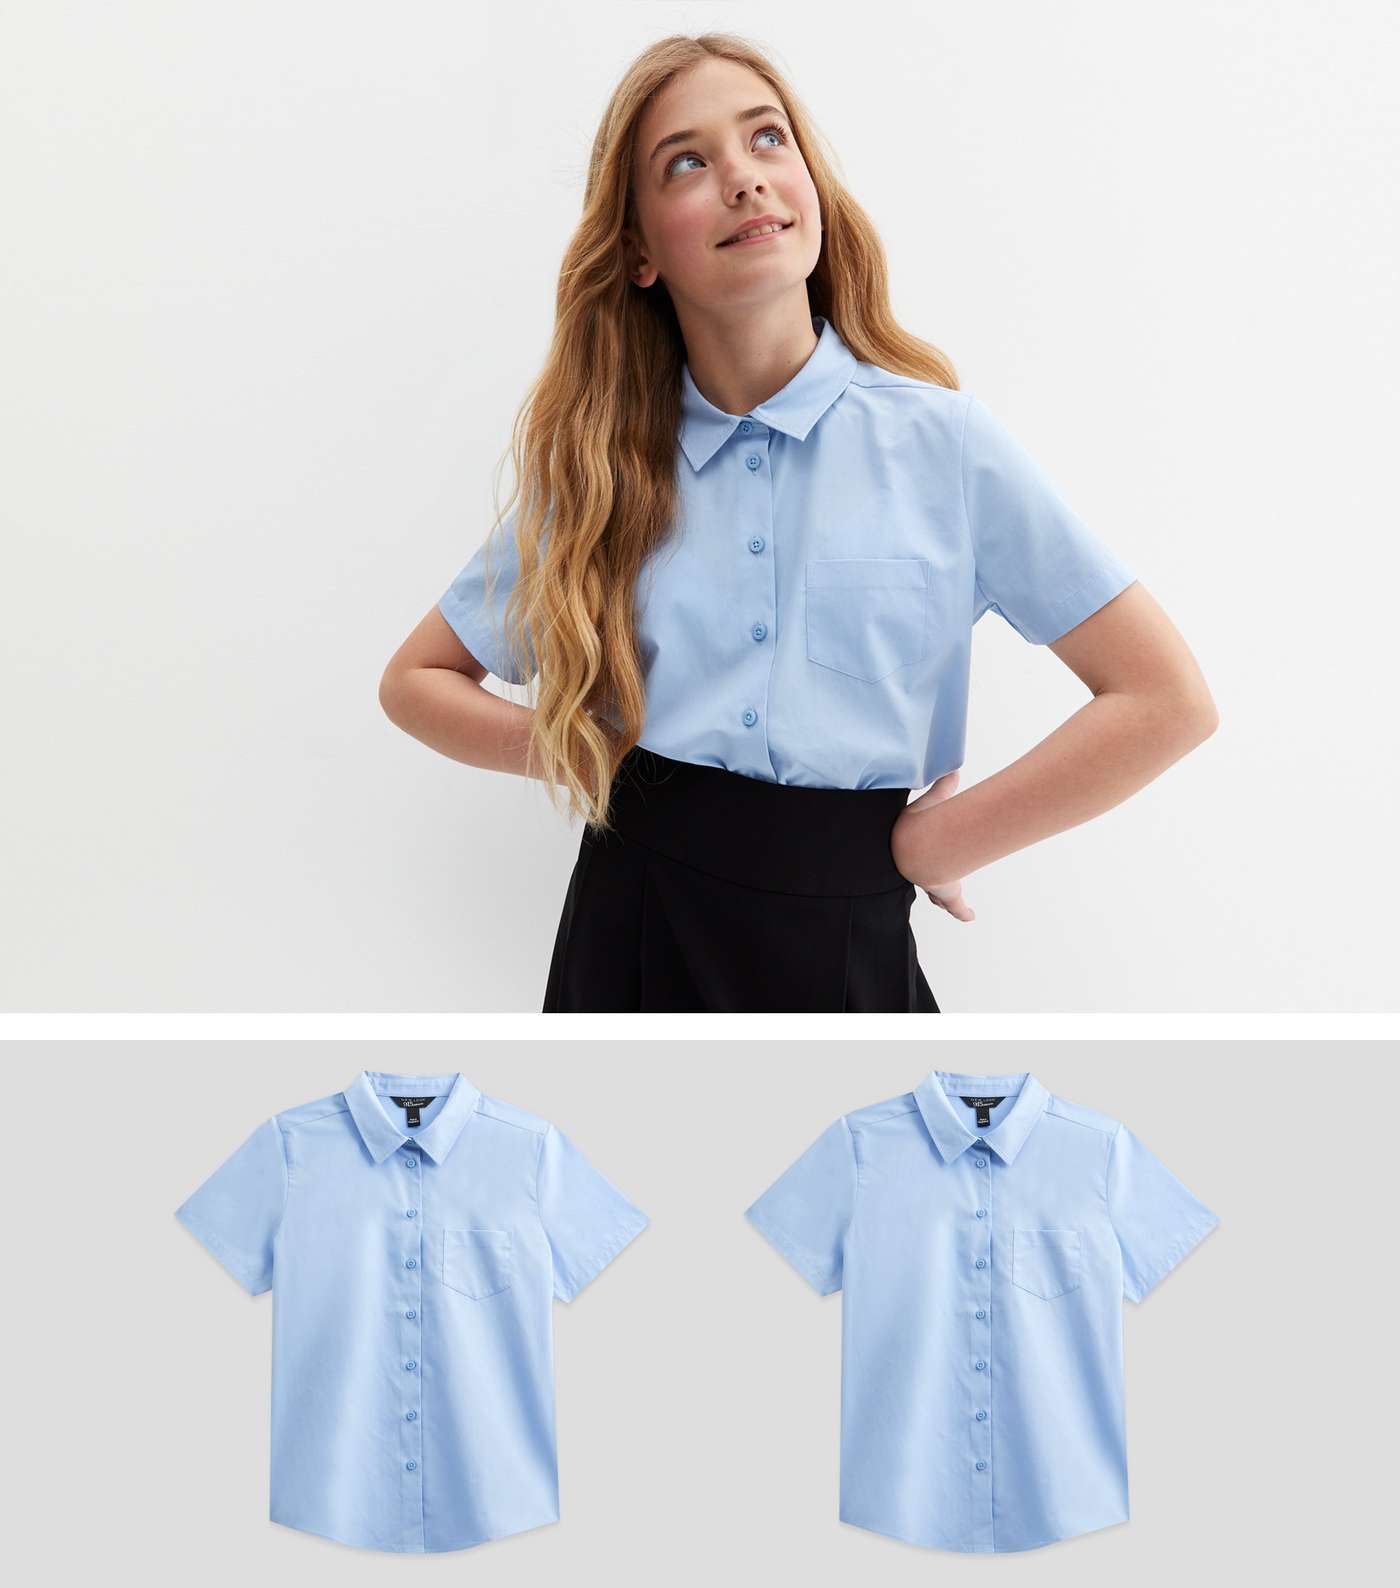 Girls 2 Pack Pale Blue Short Sleeve Easy Care School Shirts